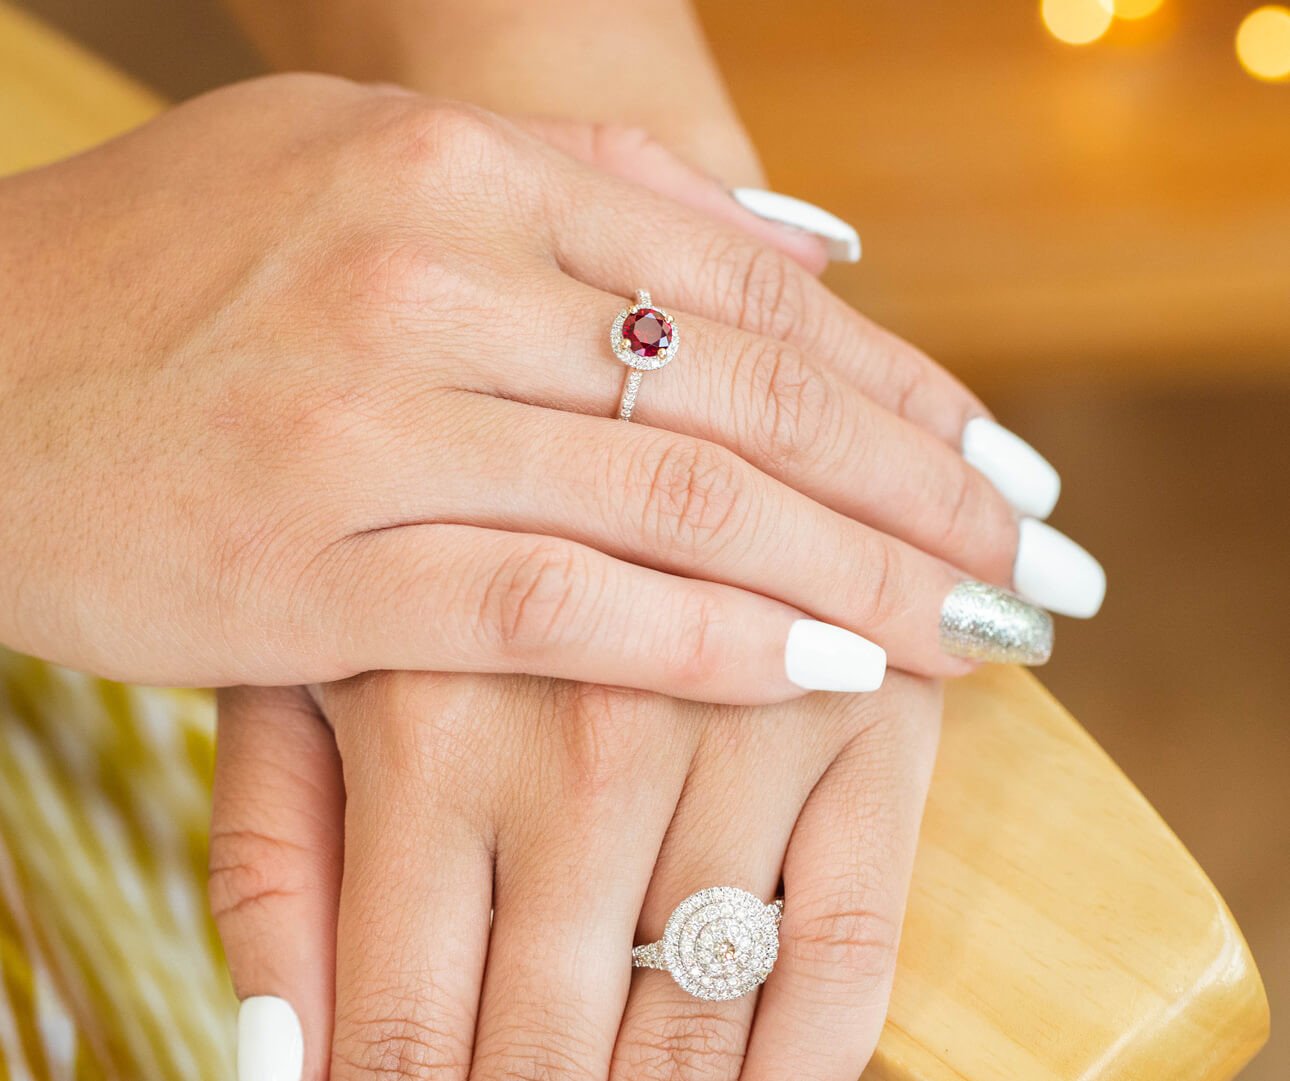 Which Finger Should You Wear a Ring On?